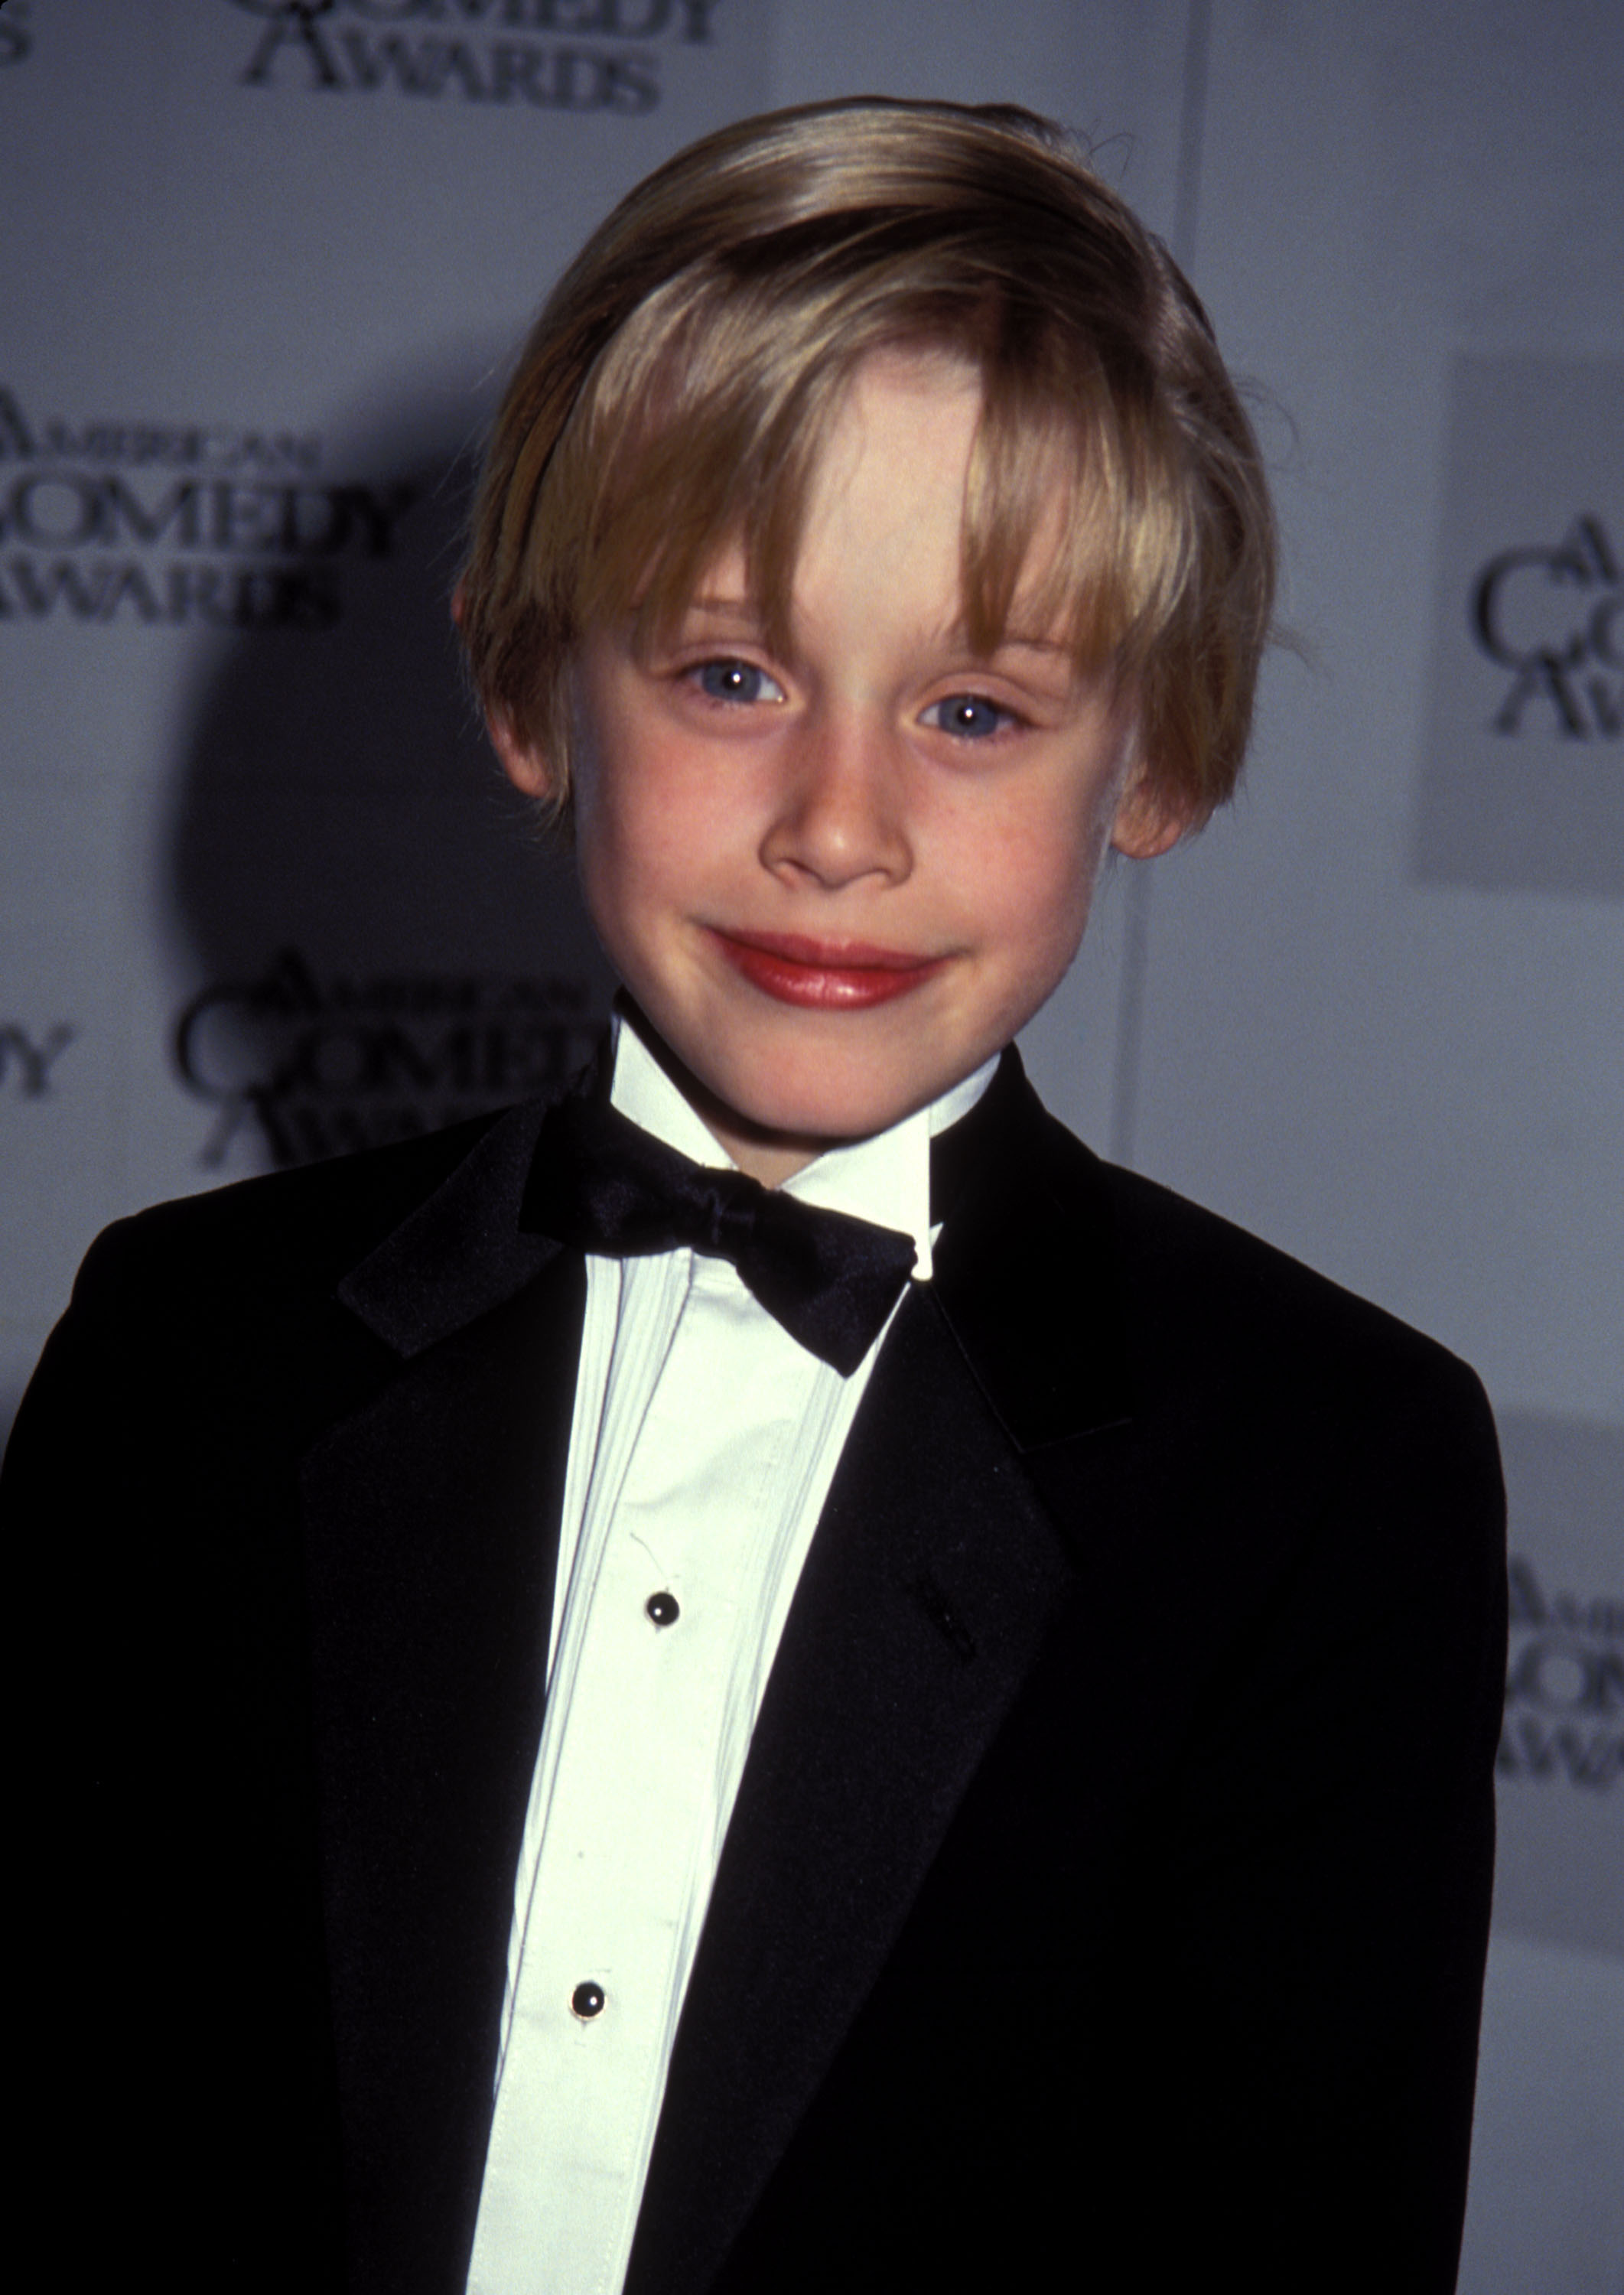 Macaulay Culkin at the 5th Annual American Comedy Awards in Los Angeles, California in 1991 | Source: Getty Images